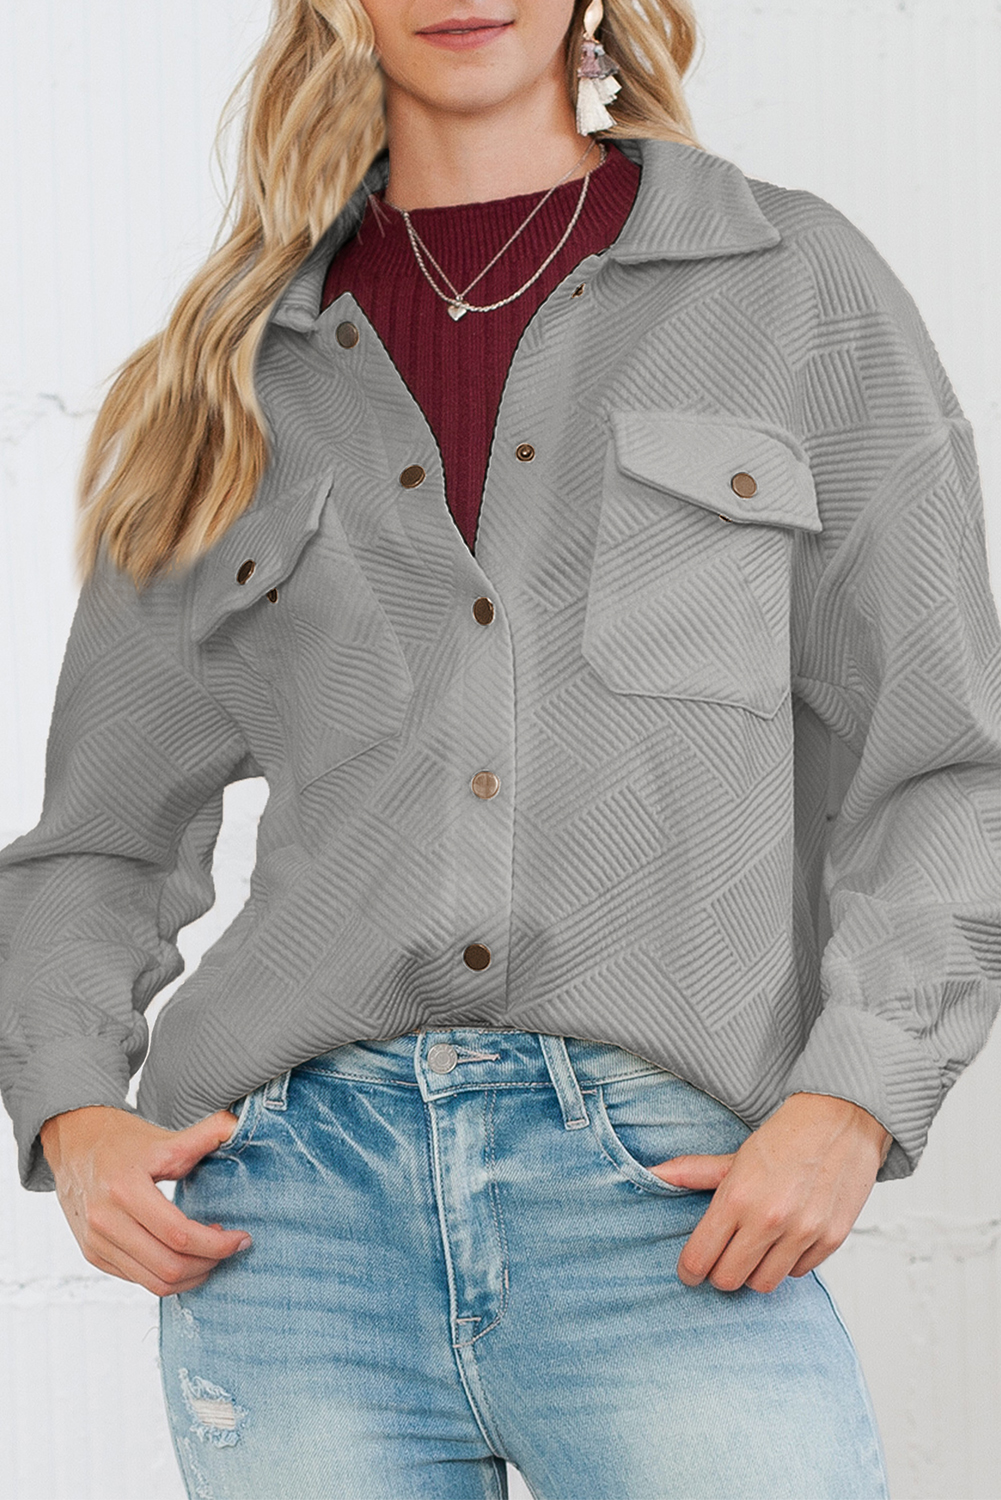 Shewin Wholesale Western Apparel Gray Solid Textured Flap Pocket Buttoned Shacket